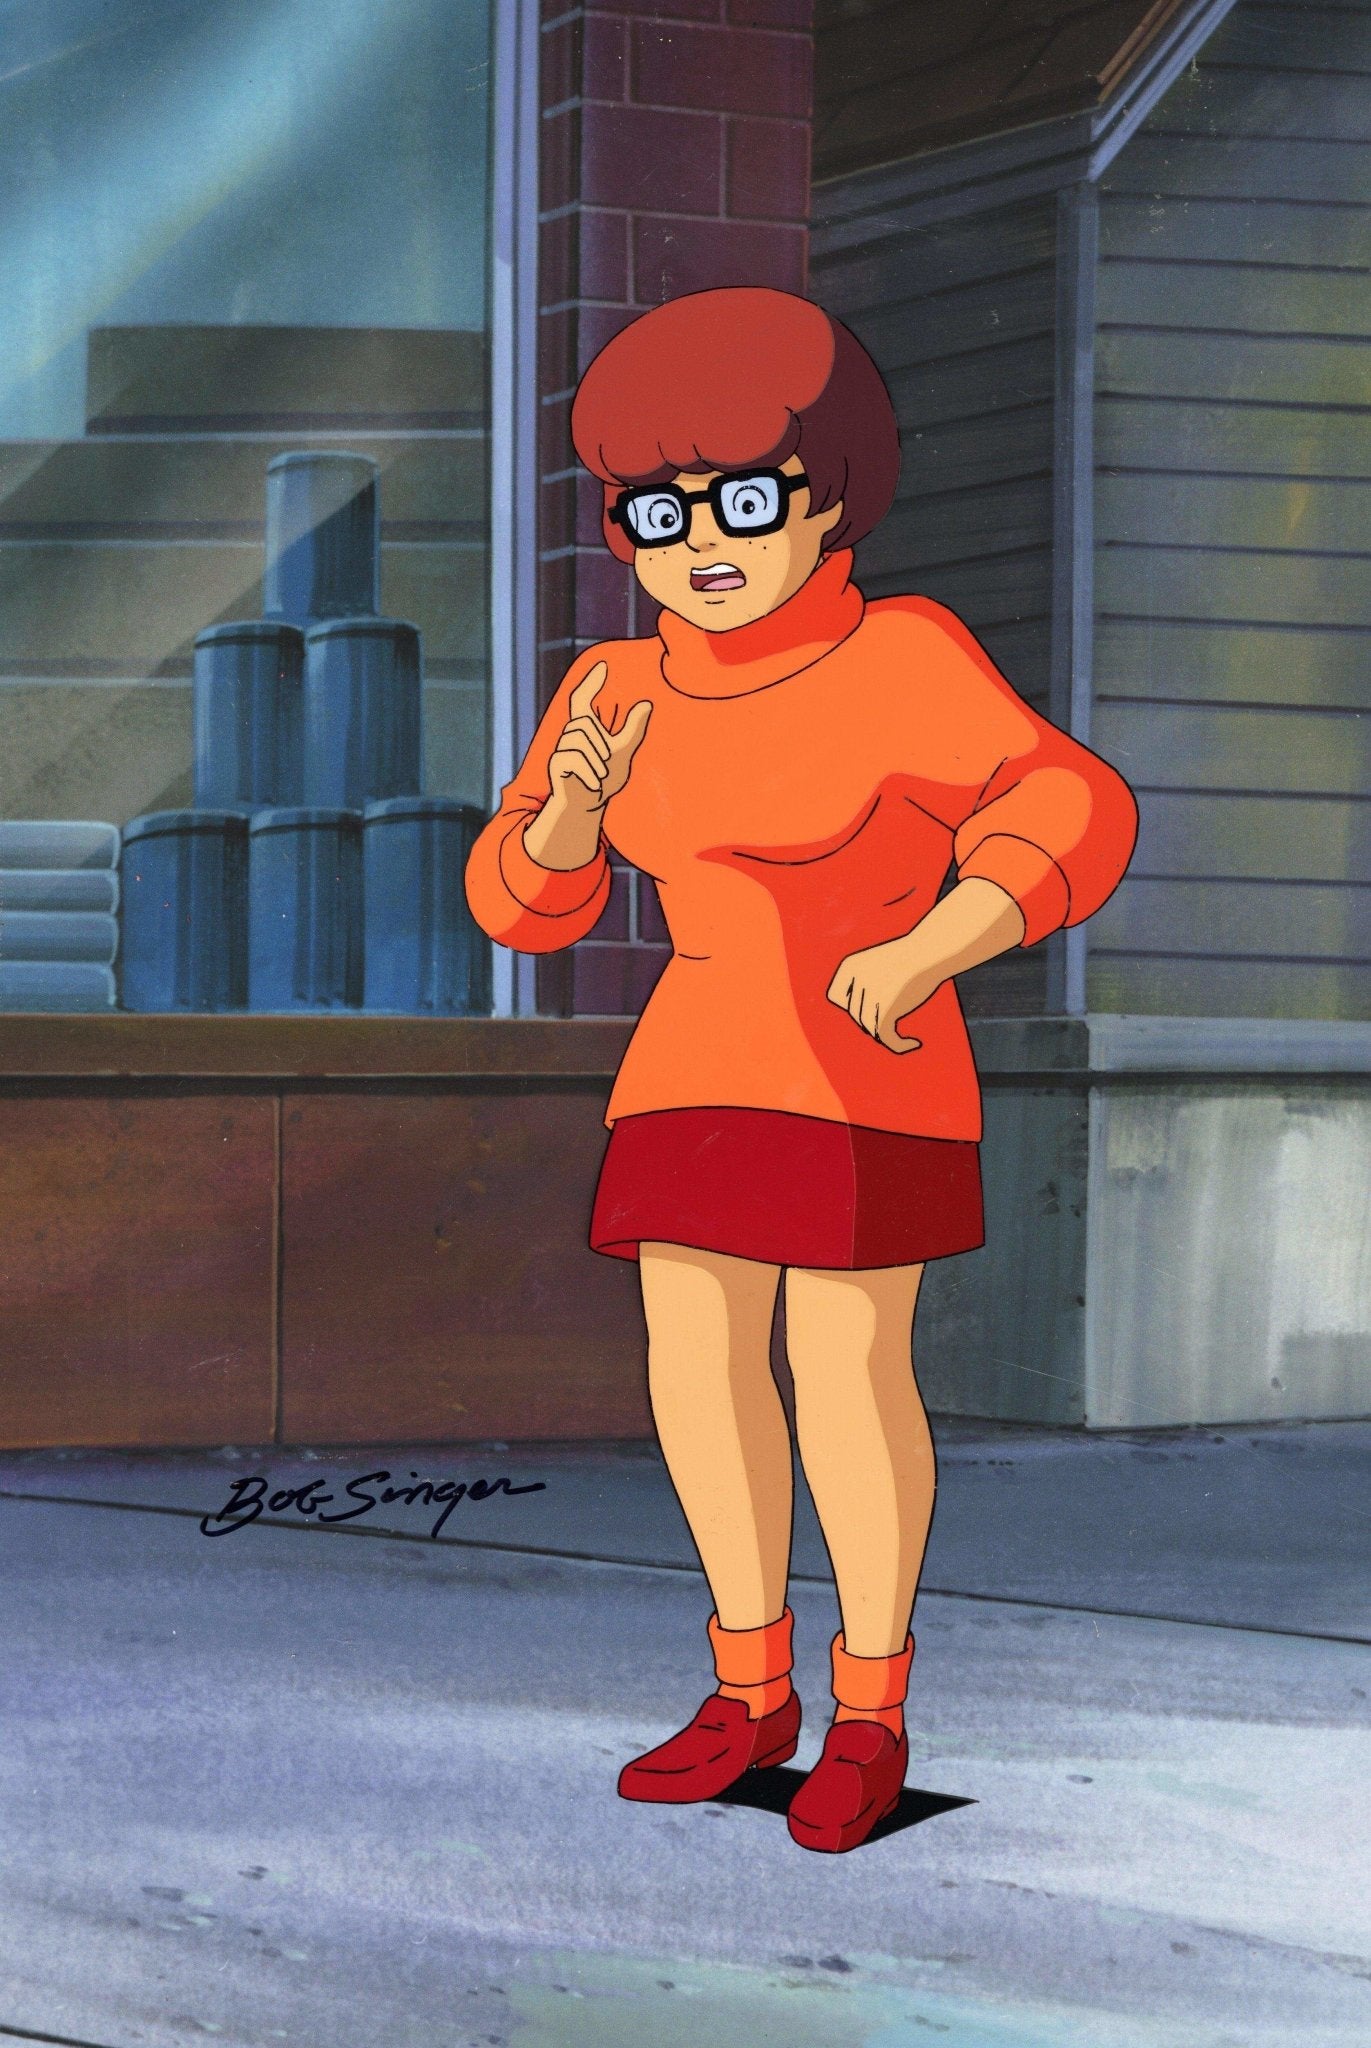 chris ning add images of velma from scooby doo photo